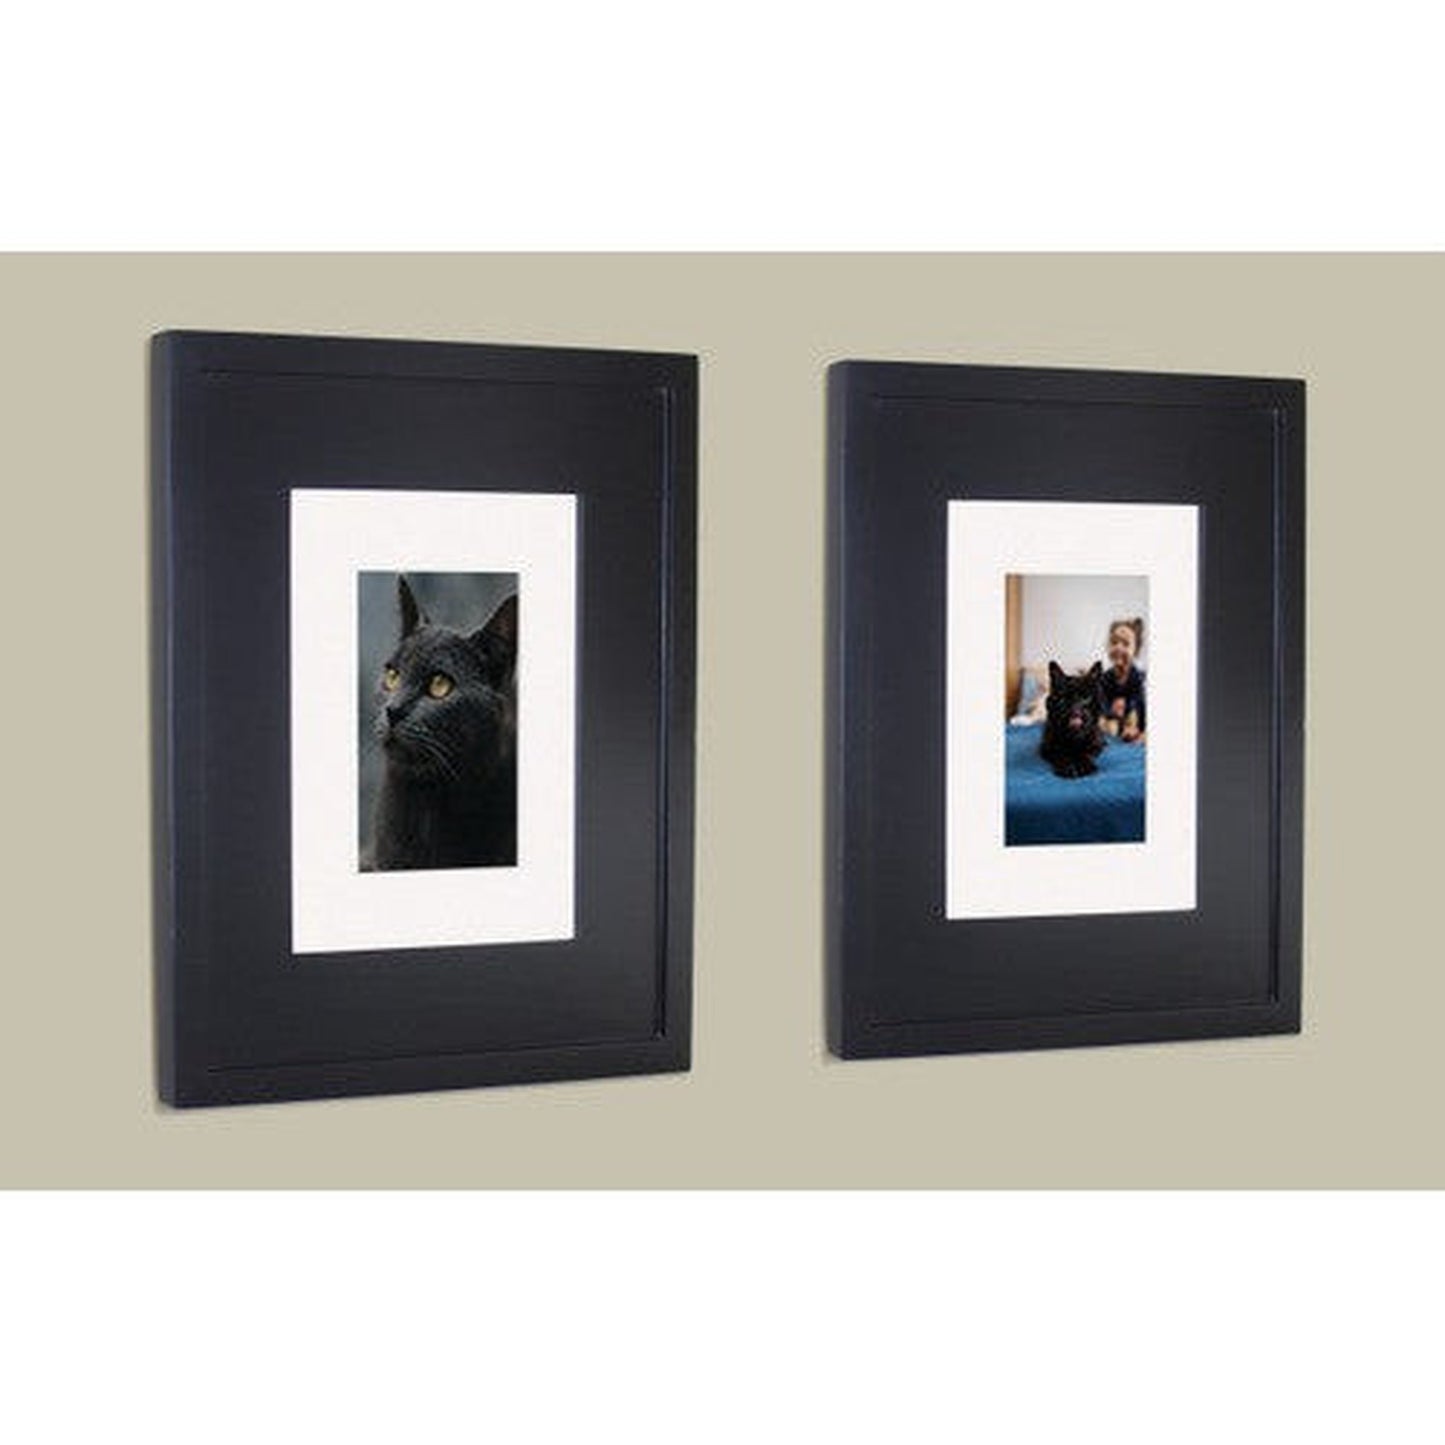 Fox Hollow Furnishings 11" x 14" Black Compact Portrait Standard 4" Depth Recessed Picture Frame Medicine Cabinet With White Matting